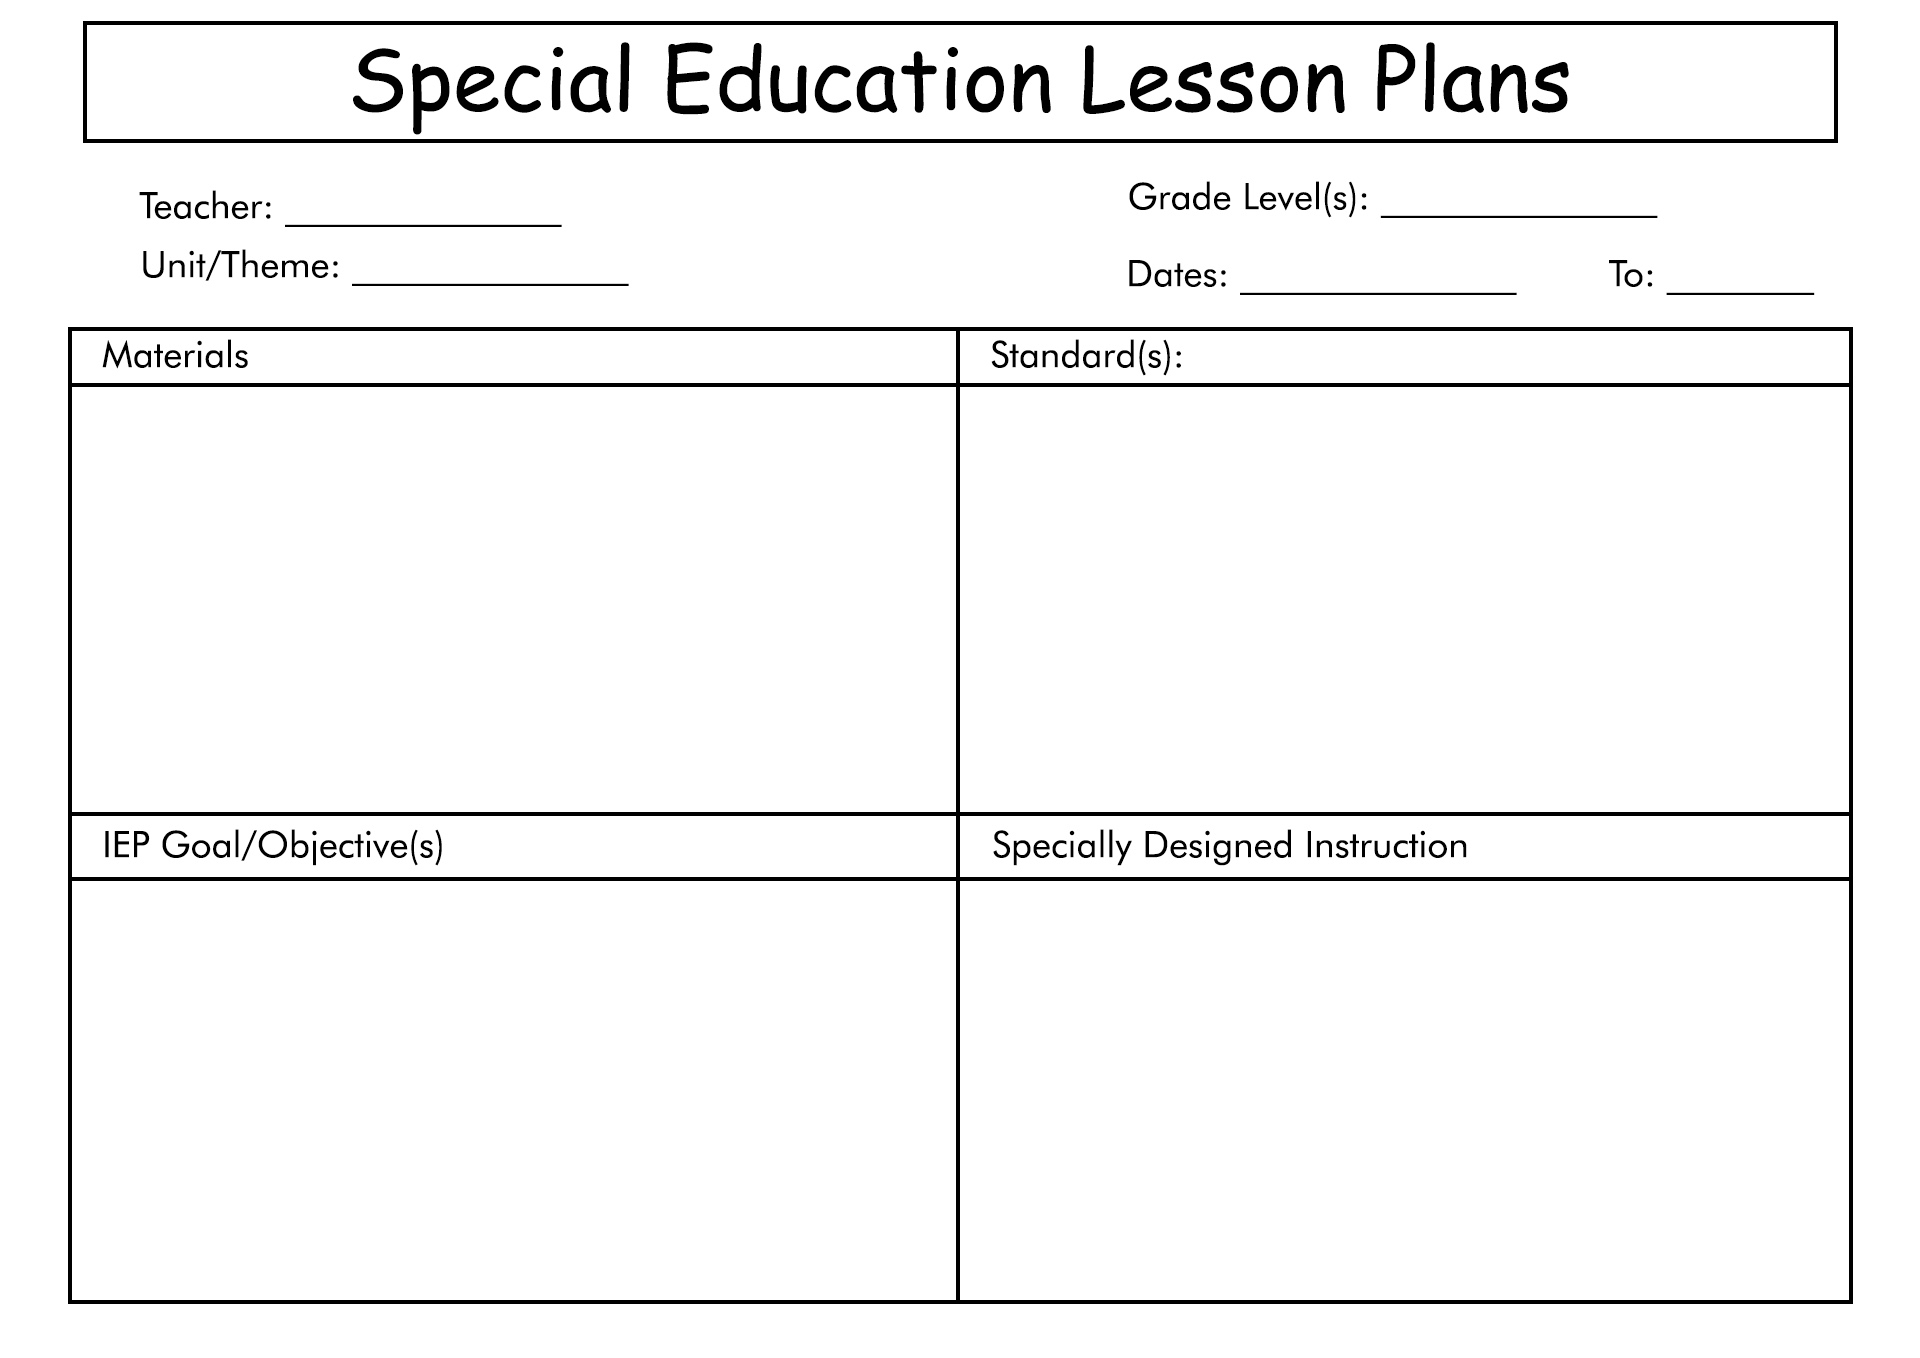 Special Education Lesson Plan